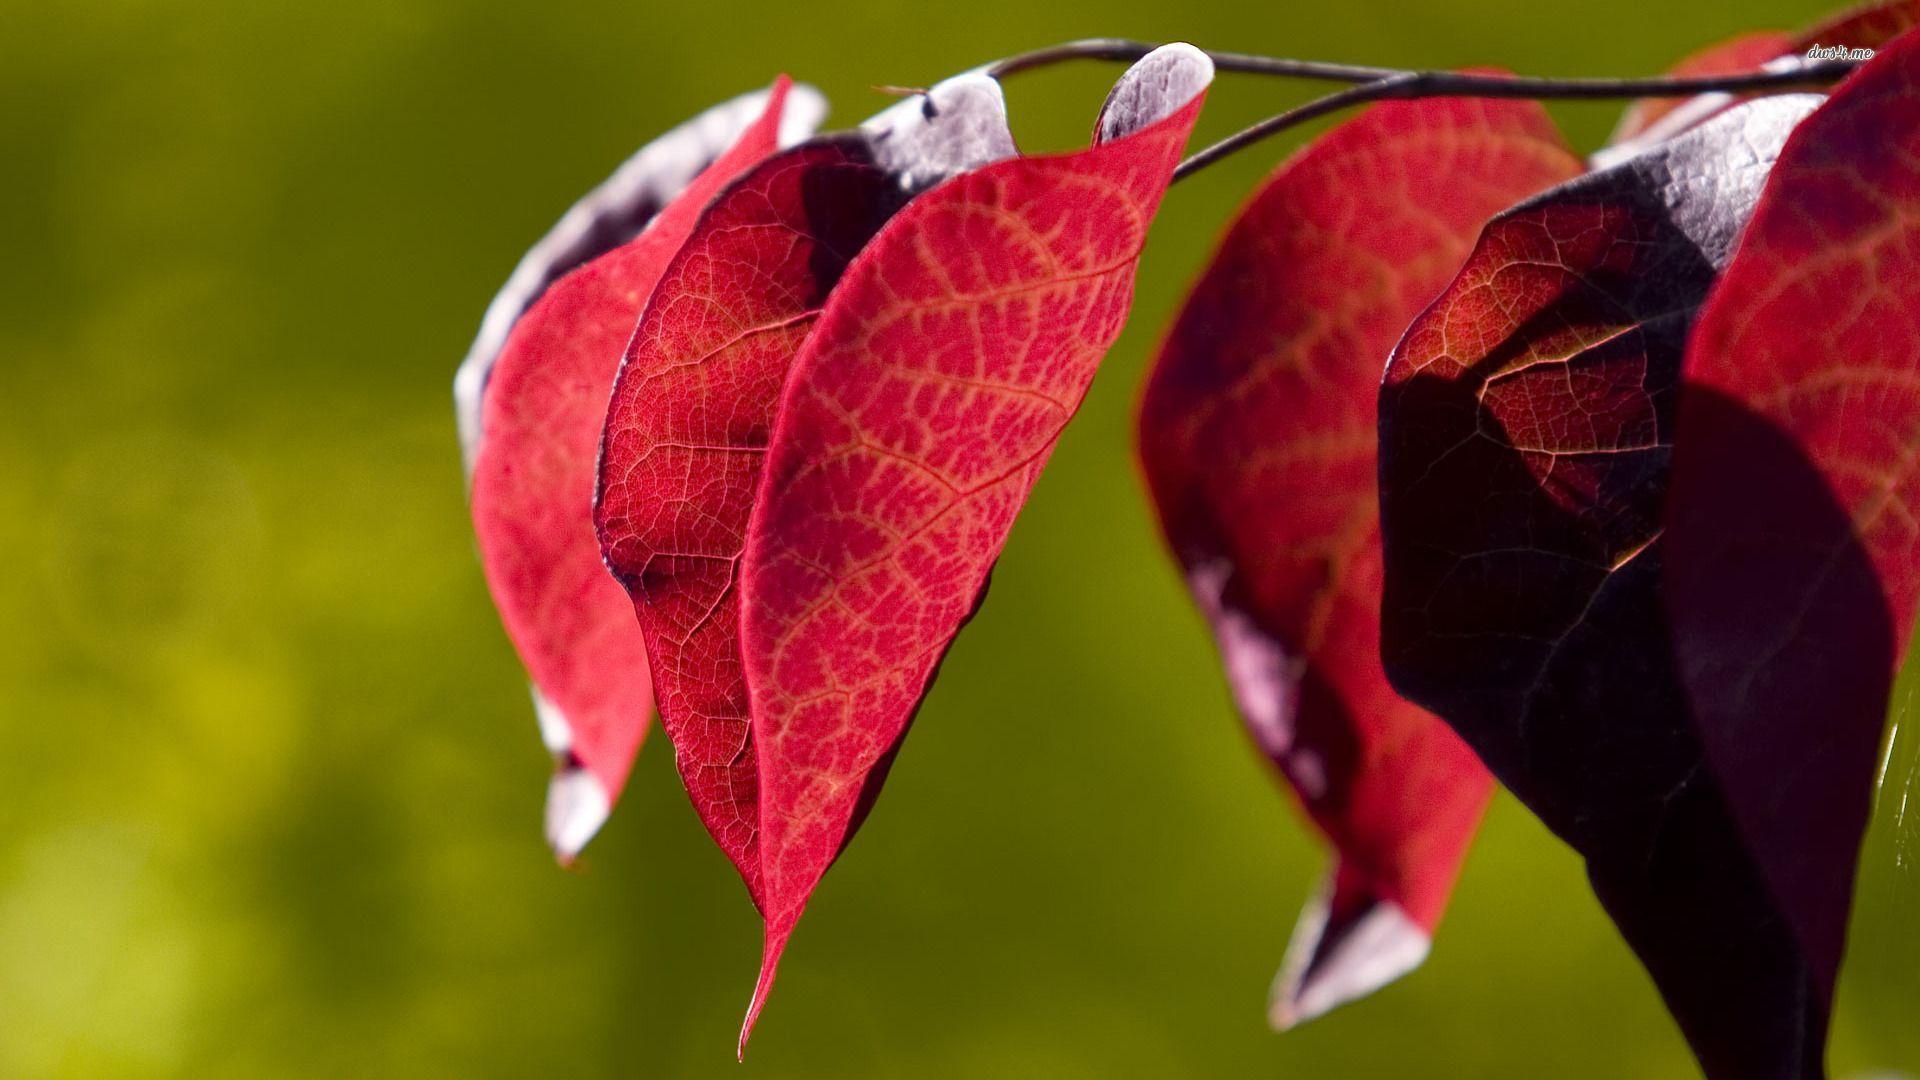 Hd Wallpaper Leaves Red Color 1920x1080PX HD Color Wallpaper